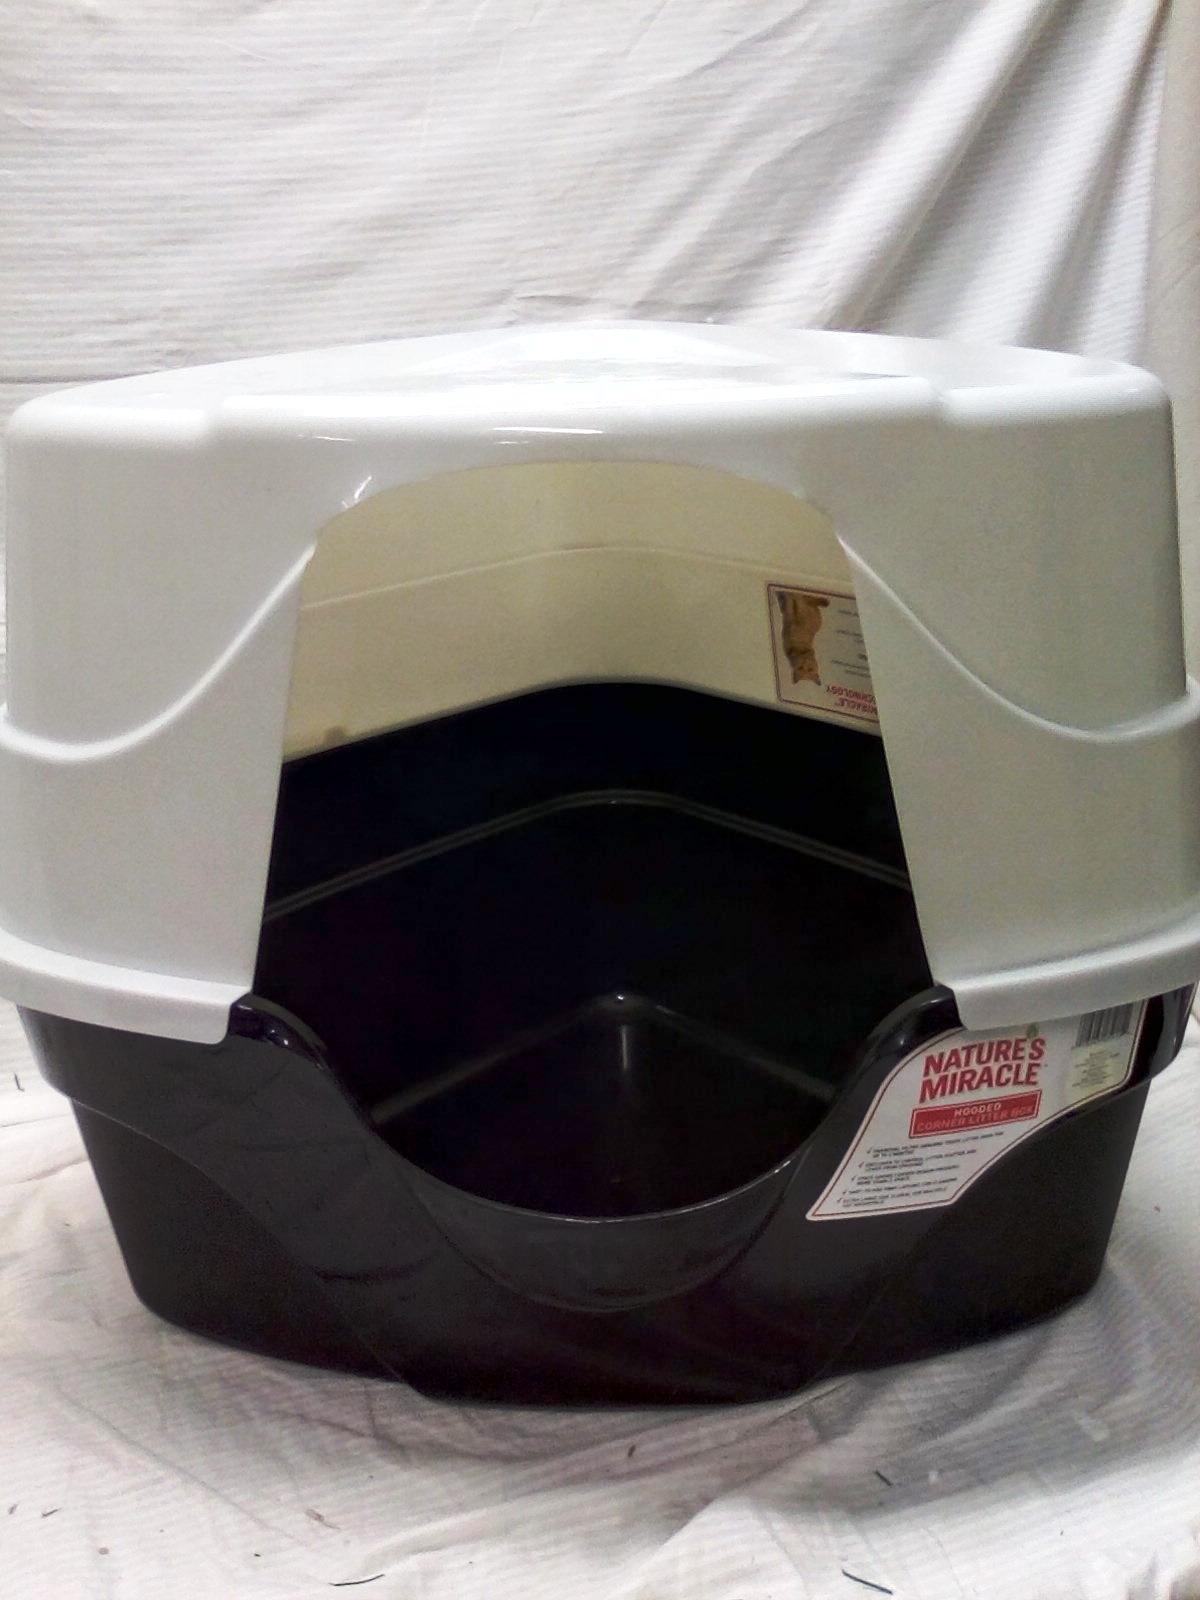 Nature's Miracle 2 Piece Hooded Corner Litter Box 26"x23"x20"